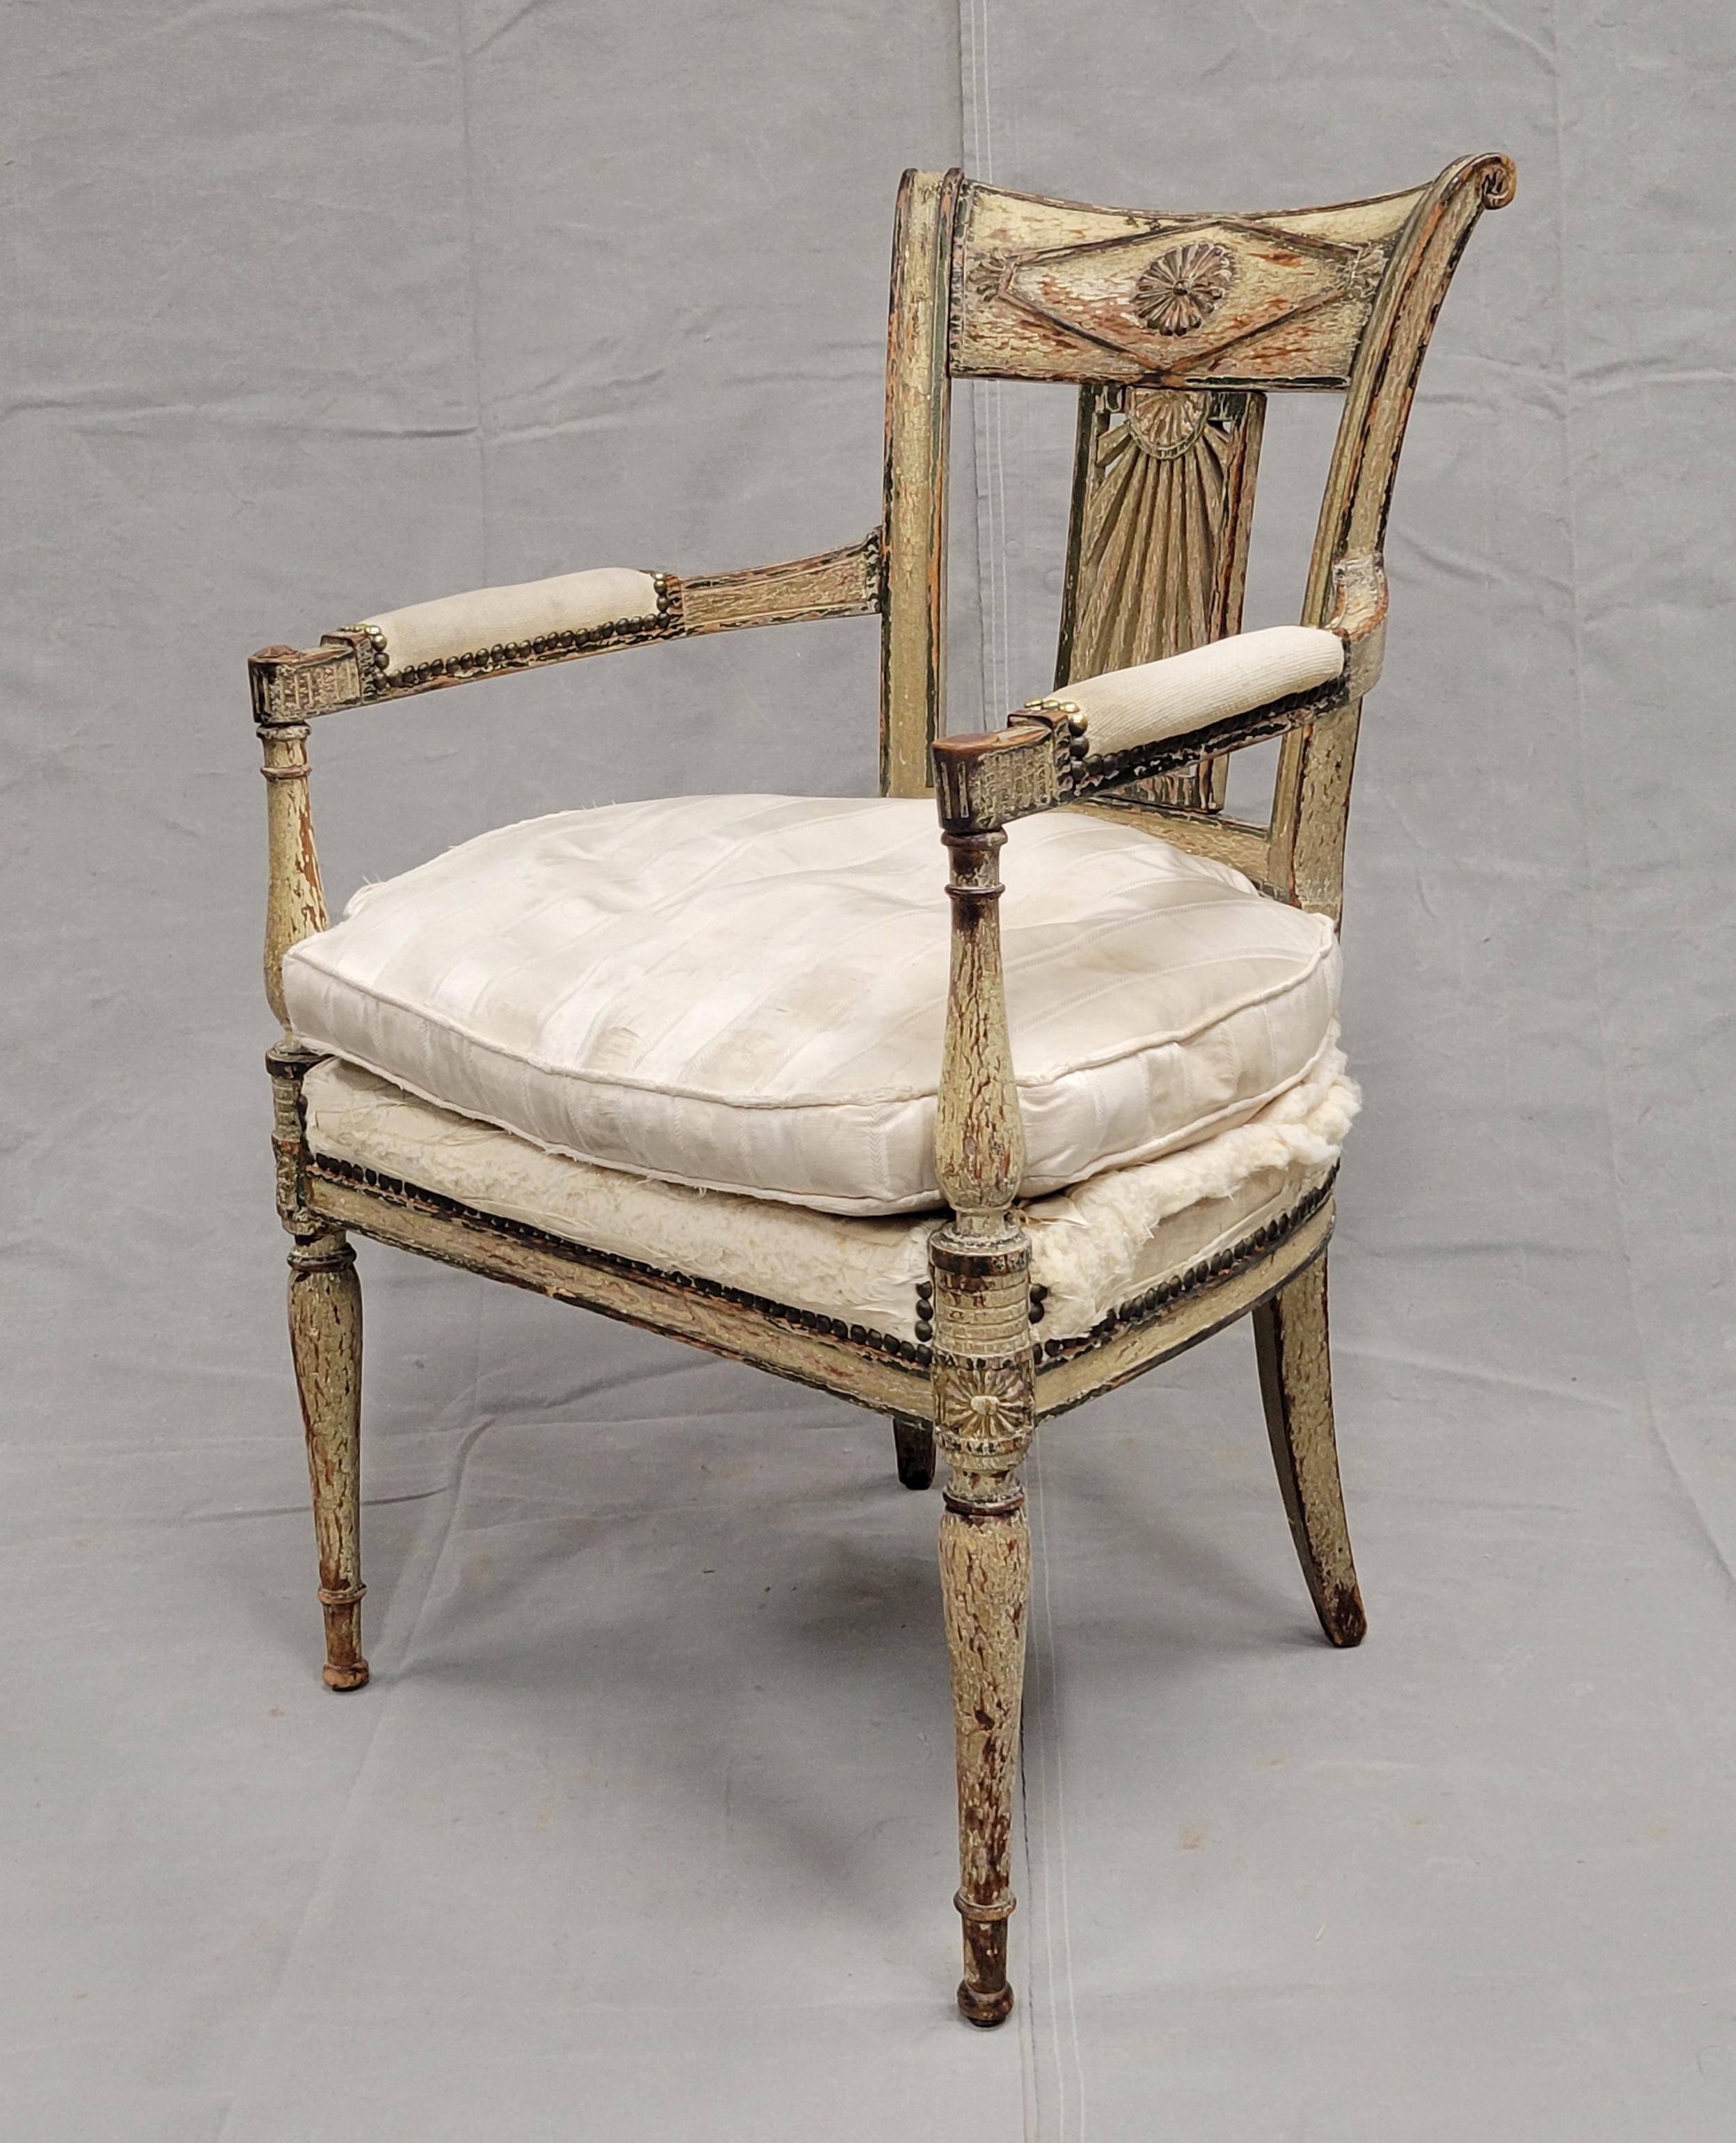 19th Century Antique Maison Jansen Style French Louis XVI Painted Fauteuil Chairs - a Pair For Sale